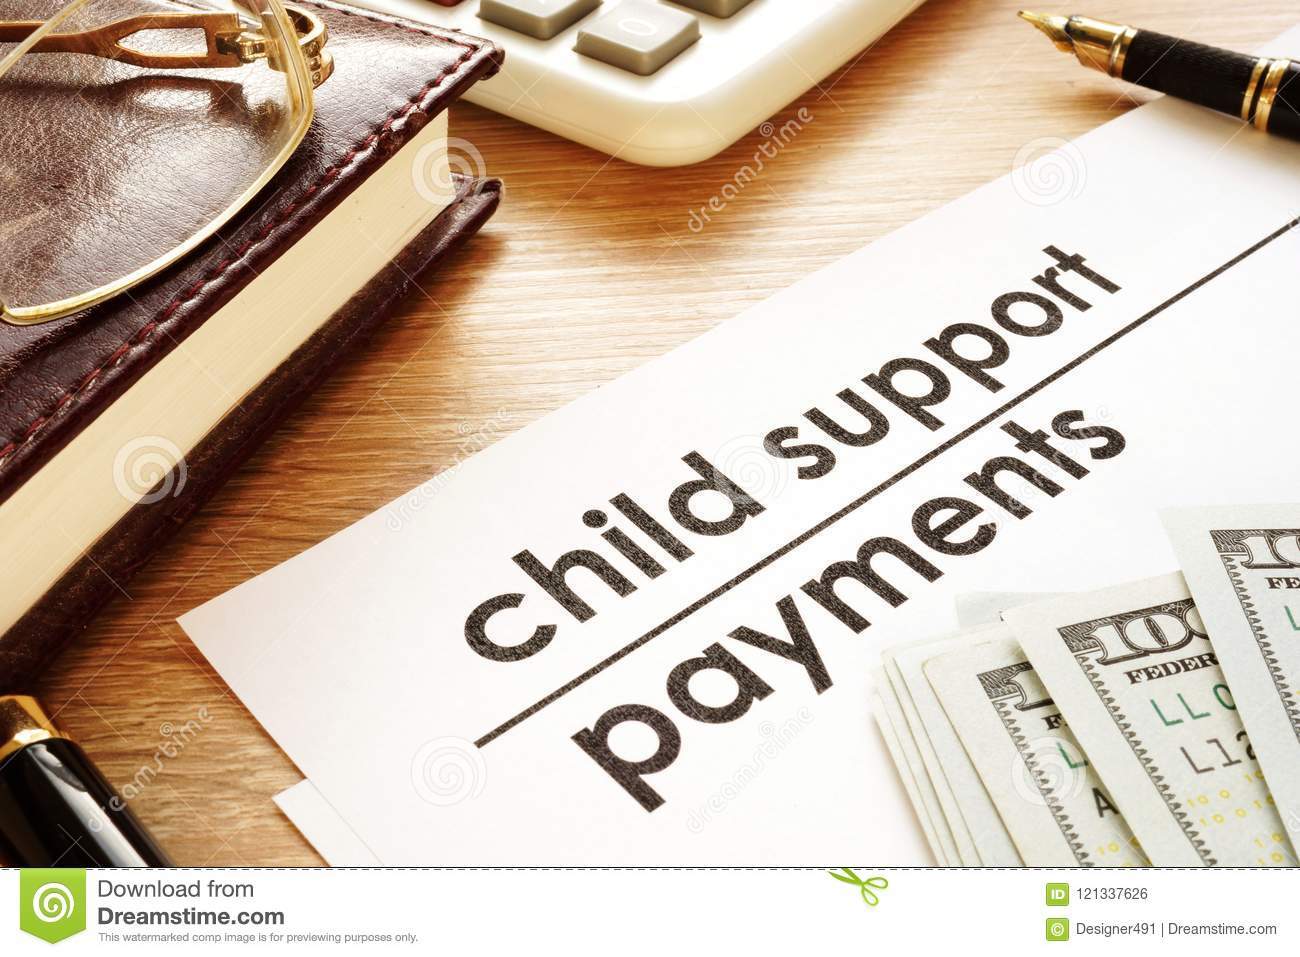 West pasco child support lawyer